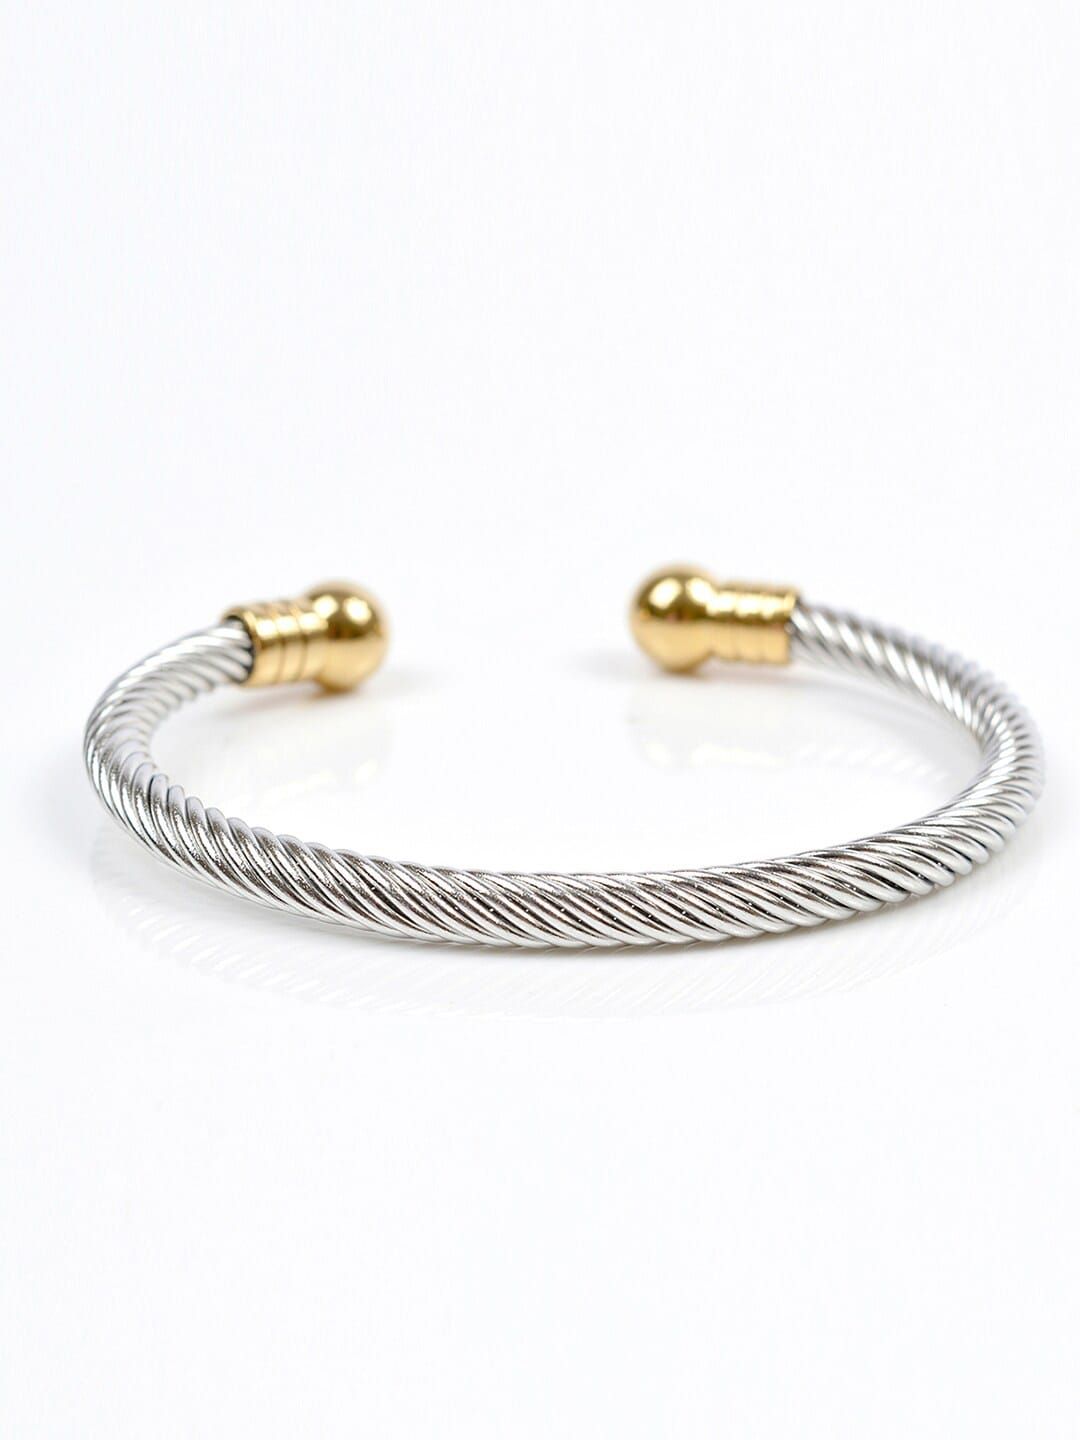 Mikoto by FableStreet Women Silver-Toned & Gold-Toned Silver-Plated Cuff Bracelet Price in India